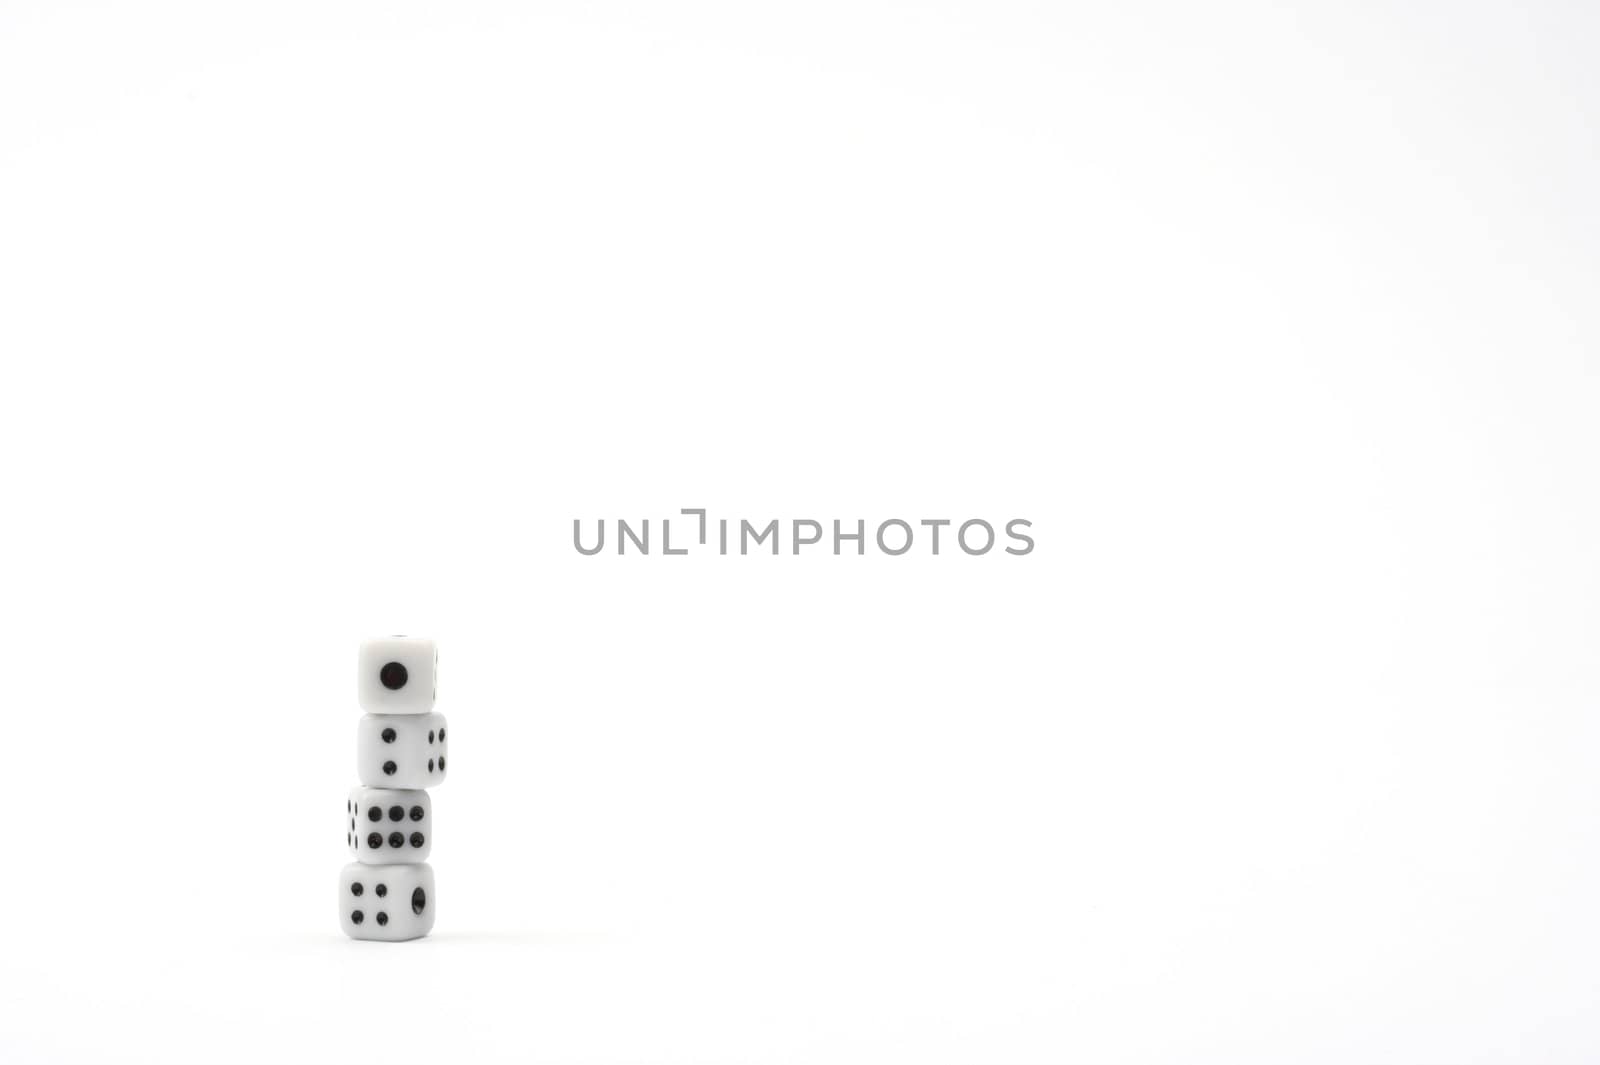 dices over white by alexkosev